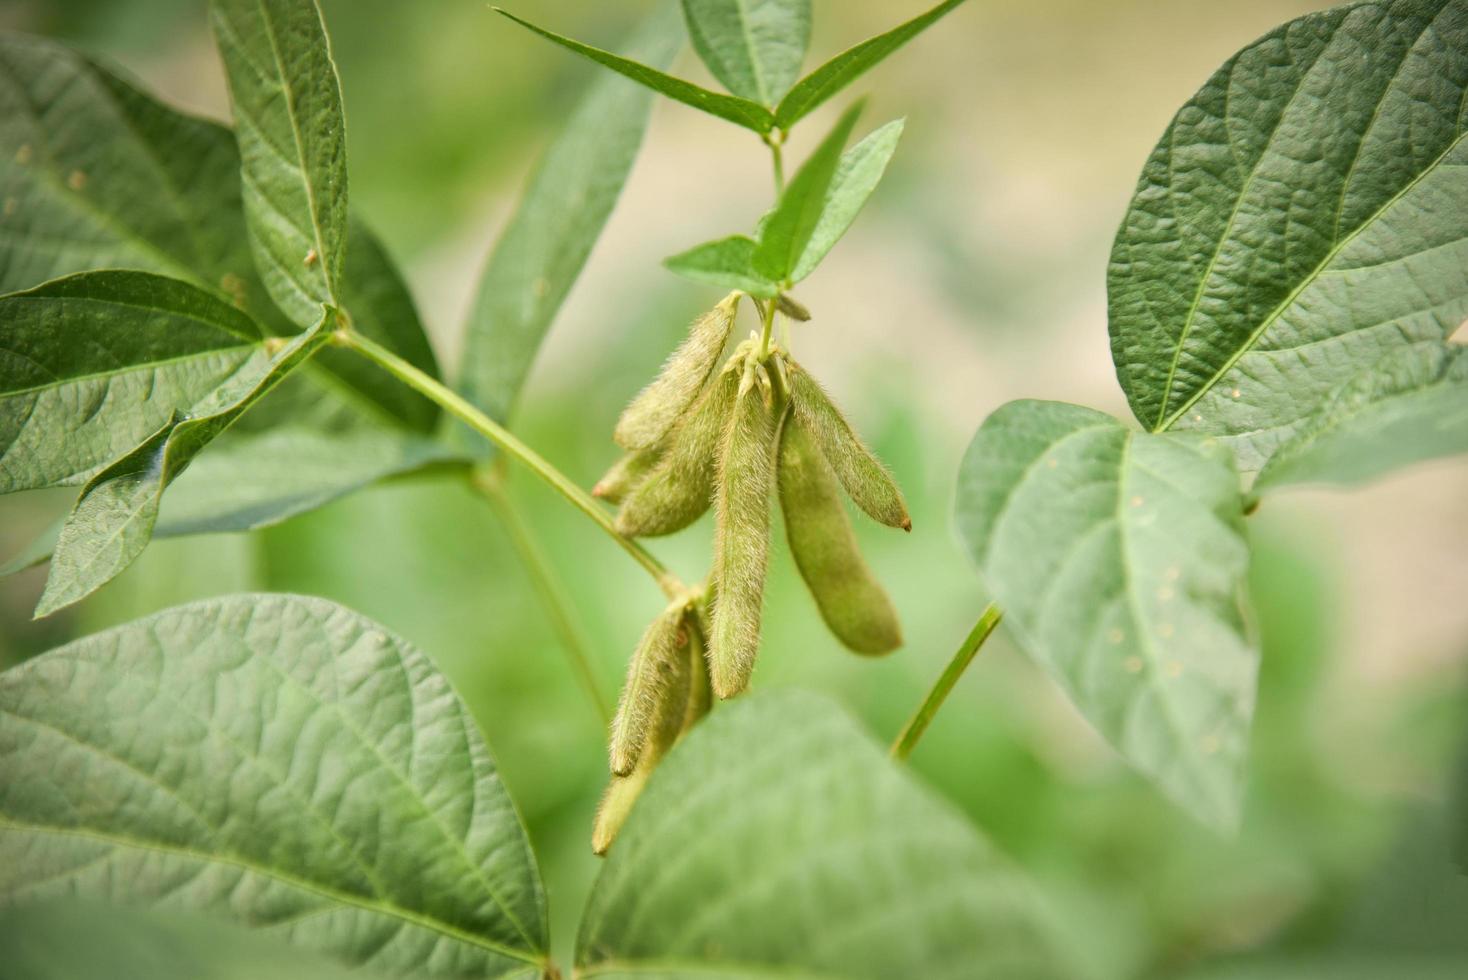 Green soybean on the tree - Young soybean seeds on the plant growing in the agriculture photo